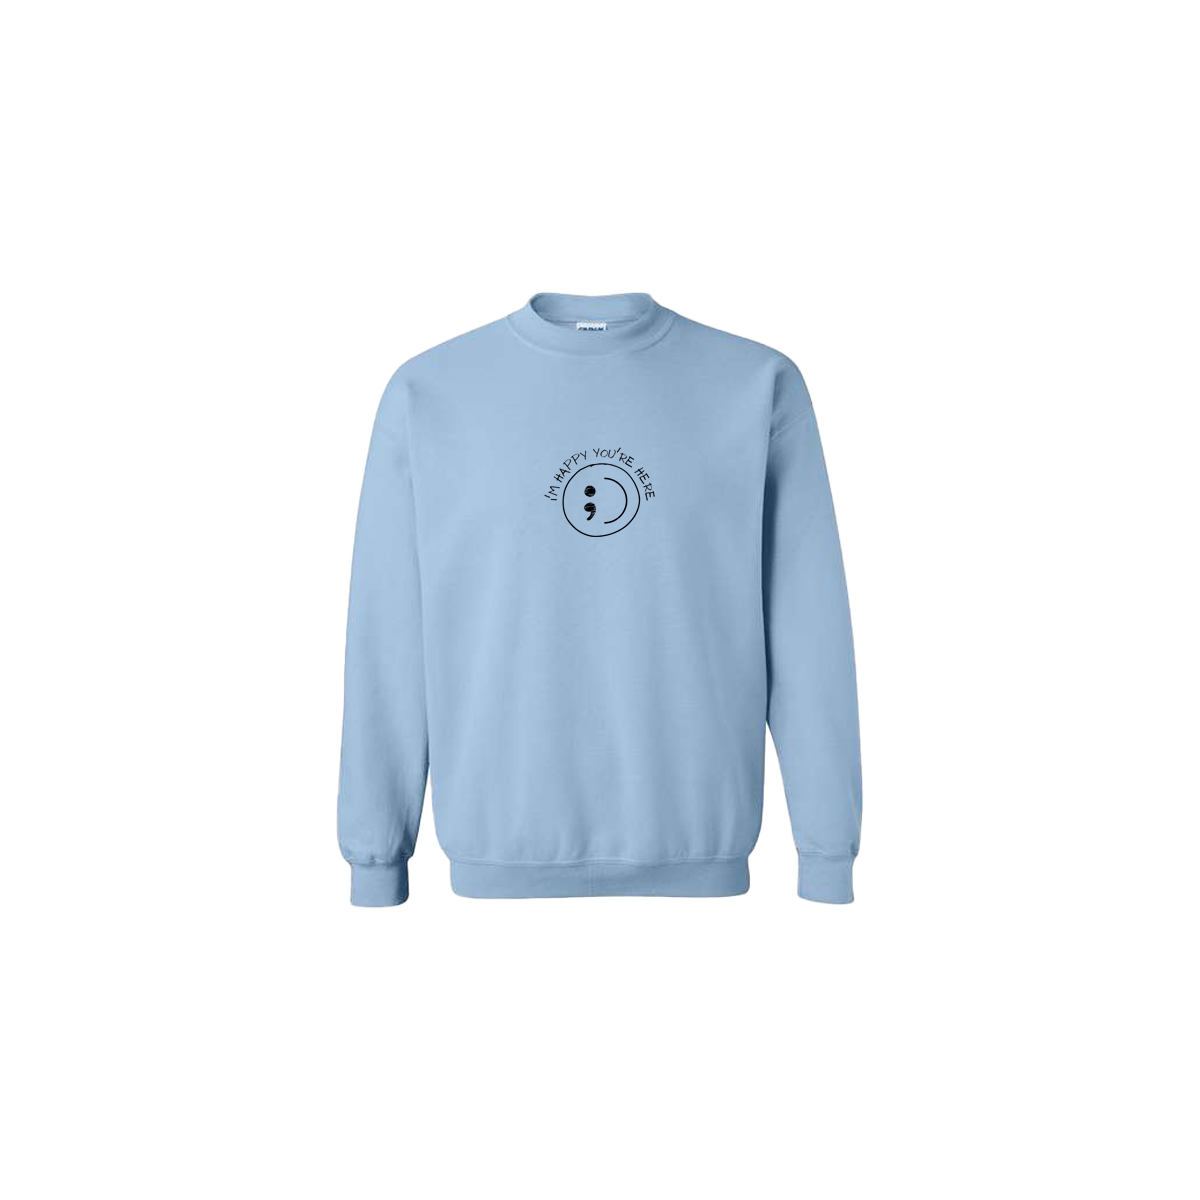 I'm Happy You're Here Embroidered Light Blue Crewneck - Mental Health Awareness Clothing